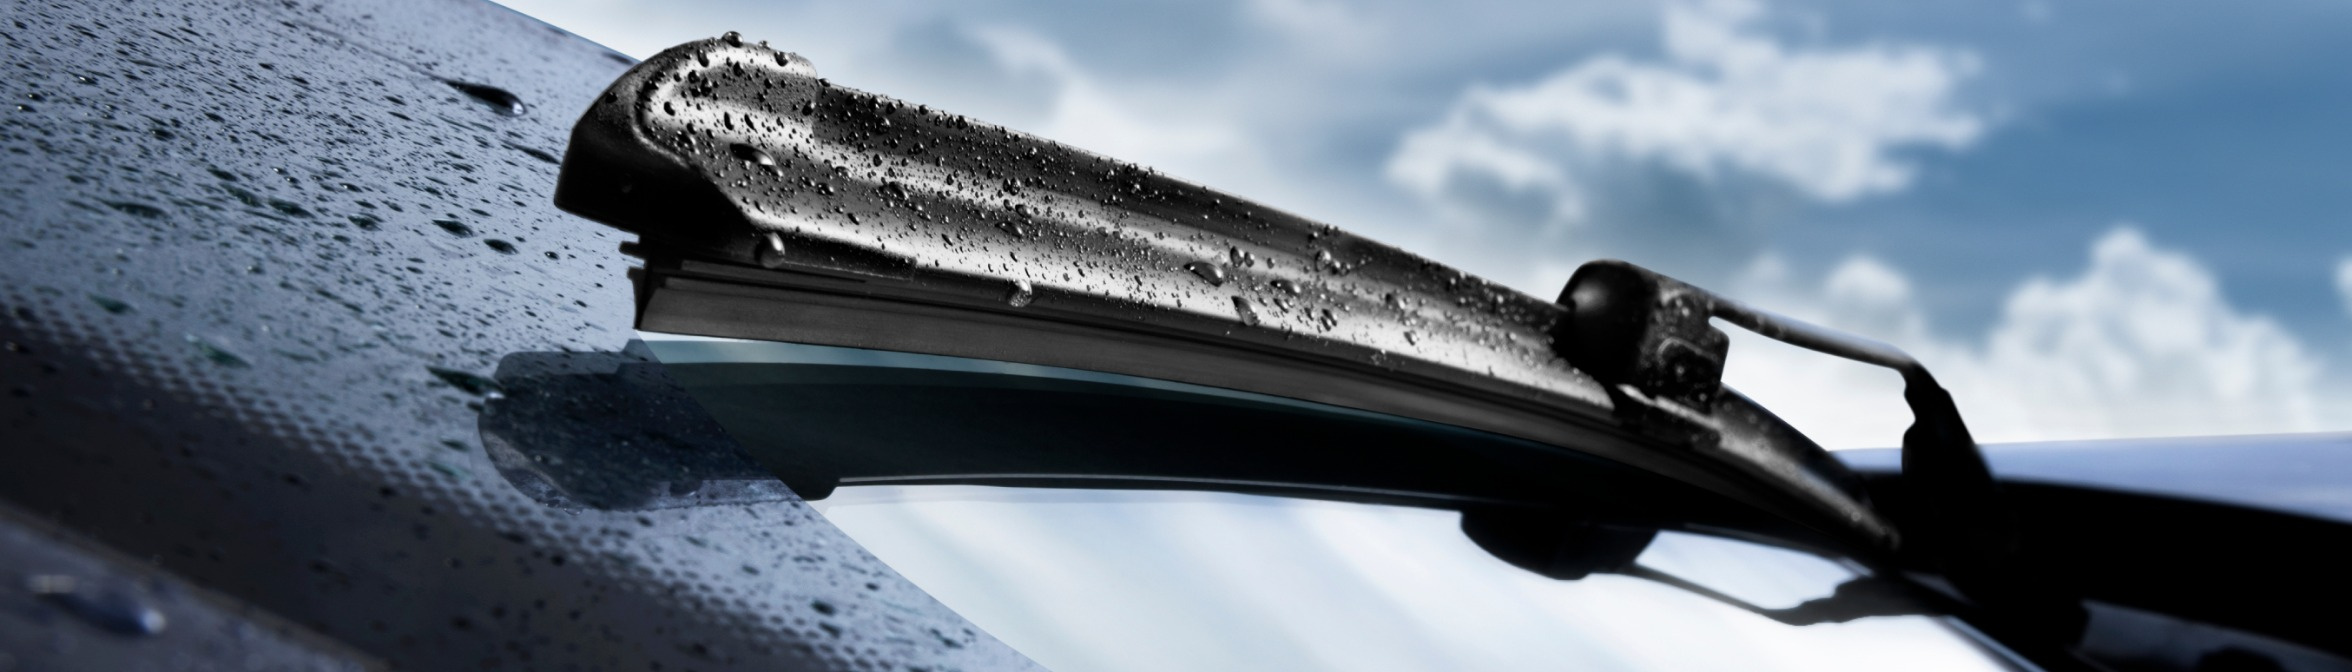 Need New Windshield Wipers for Your Dodge Grand Caravan: 15 Essential Tips for Finding the Perfect Fit